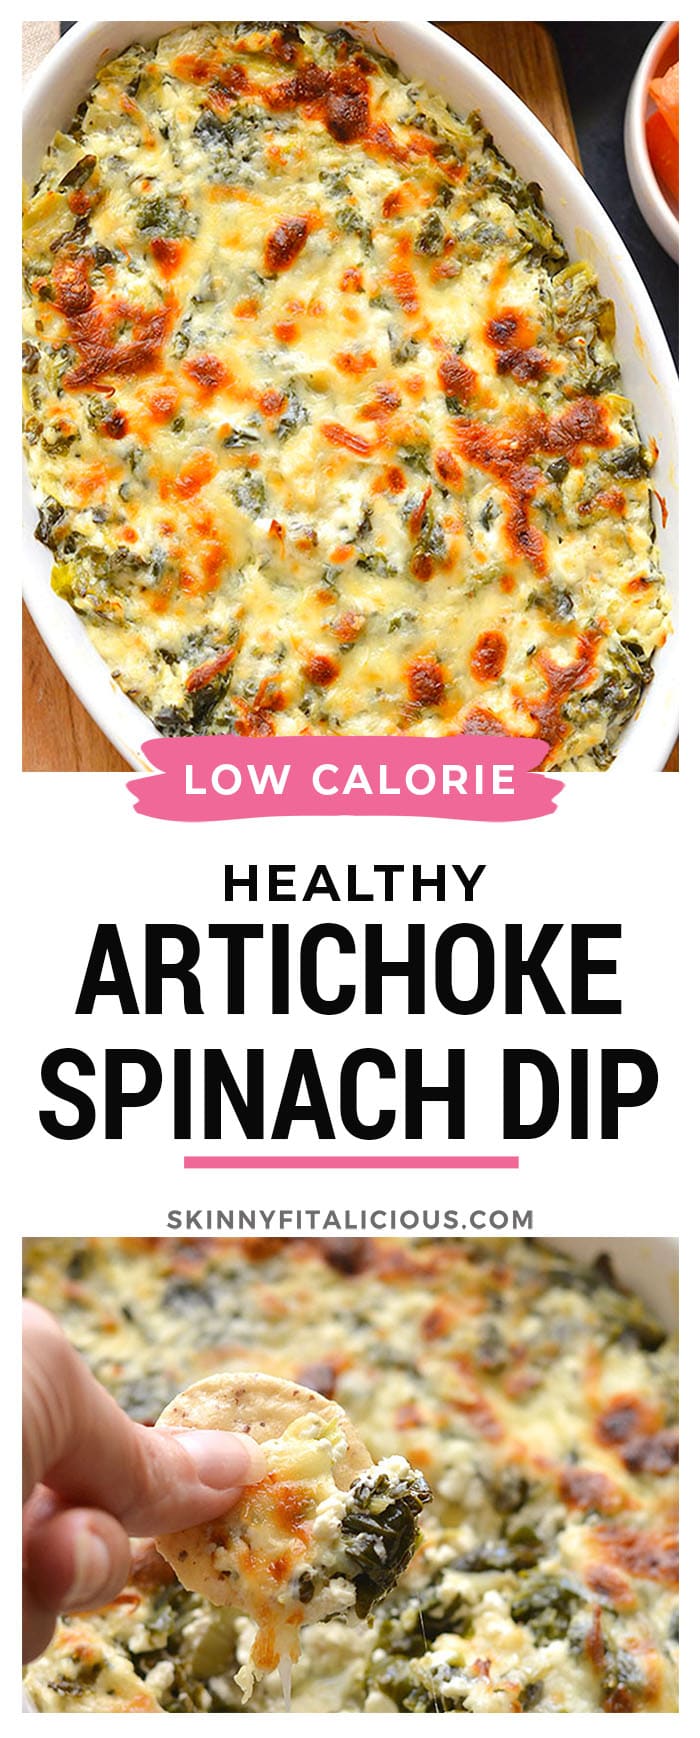 Healthy Spinach Artichoke Dip! Made higher protein and lower calorie with cottage cheese and Greek yogurt, this healthy side dish is delicious served as an appetizer with veggies, crackers or chips! Gluten Free + Low Calorie + Low Carb